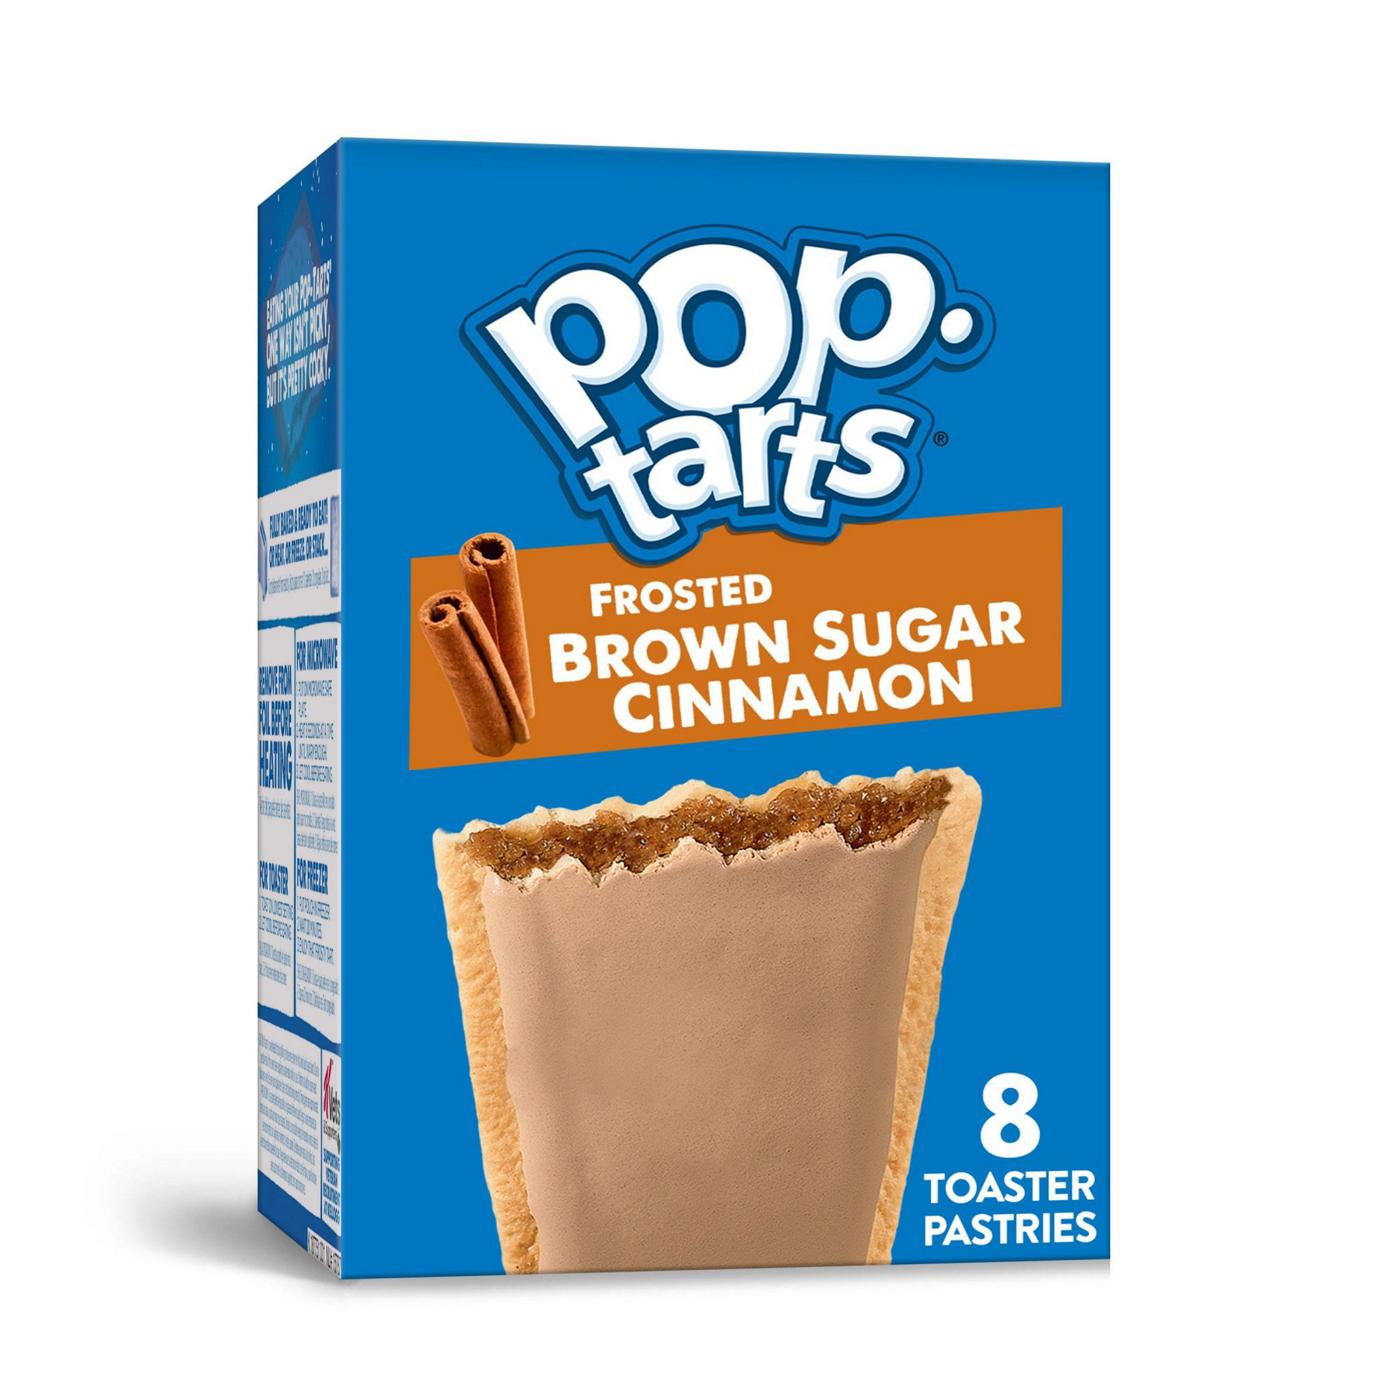 Pop-Tarts Frosted Brown Sugar Cinnamon Toaster Pastries; image 1 of 12